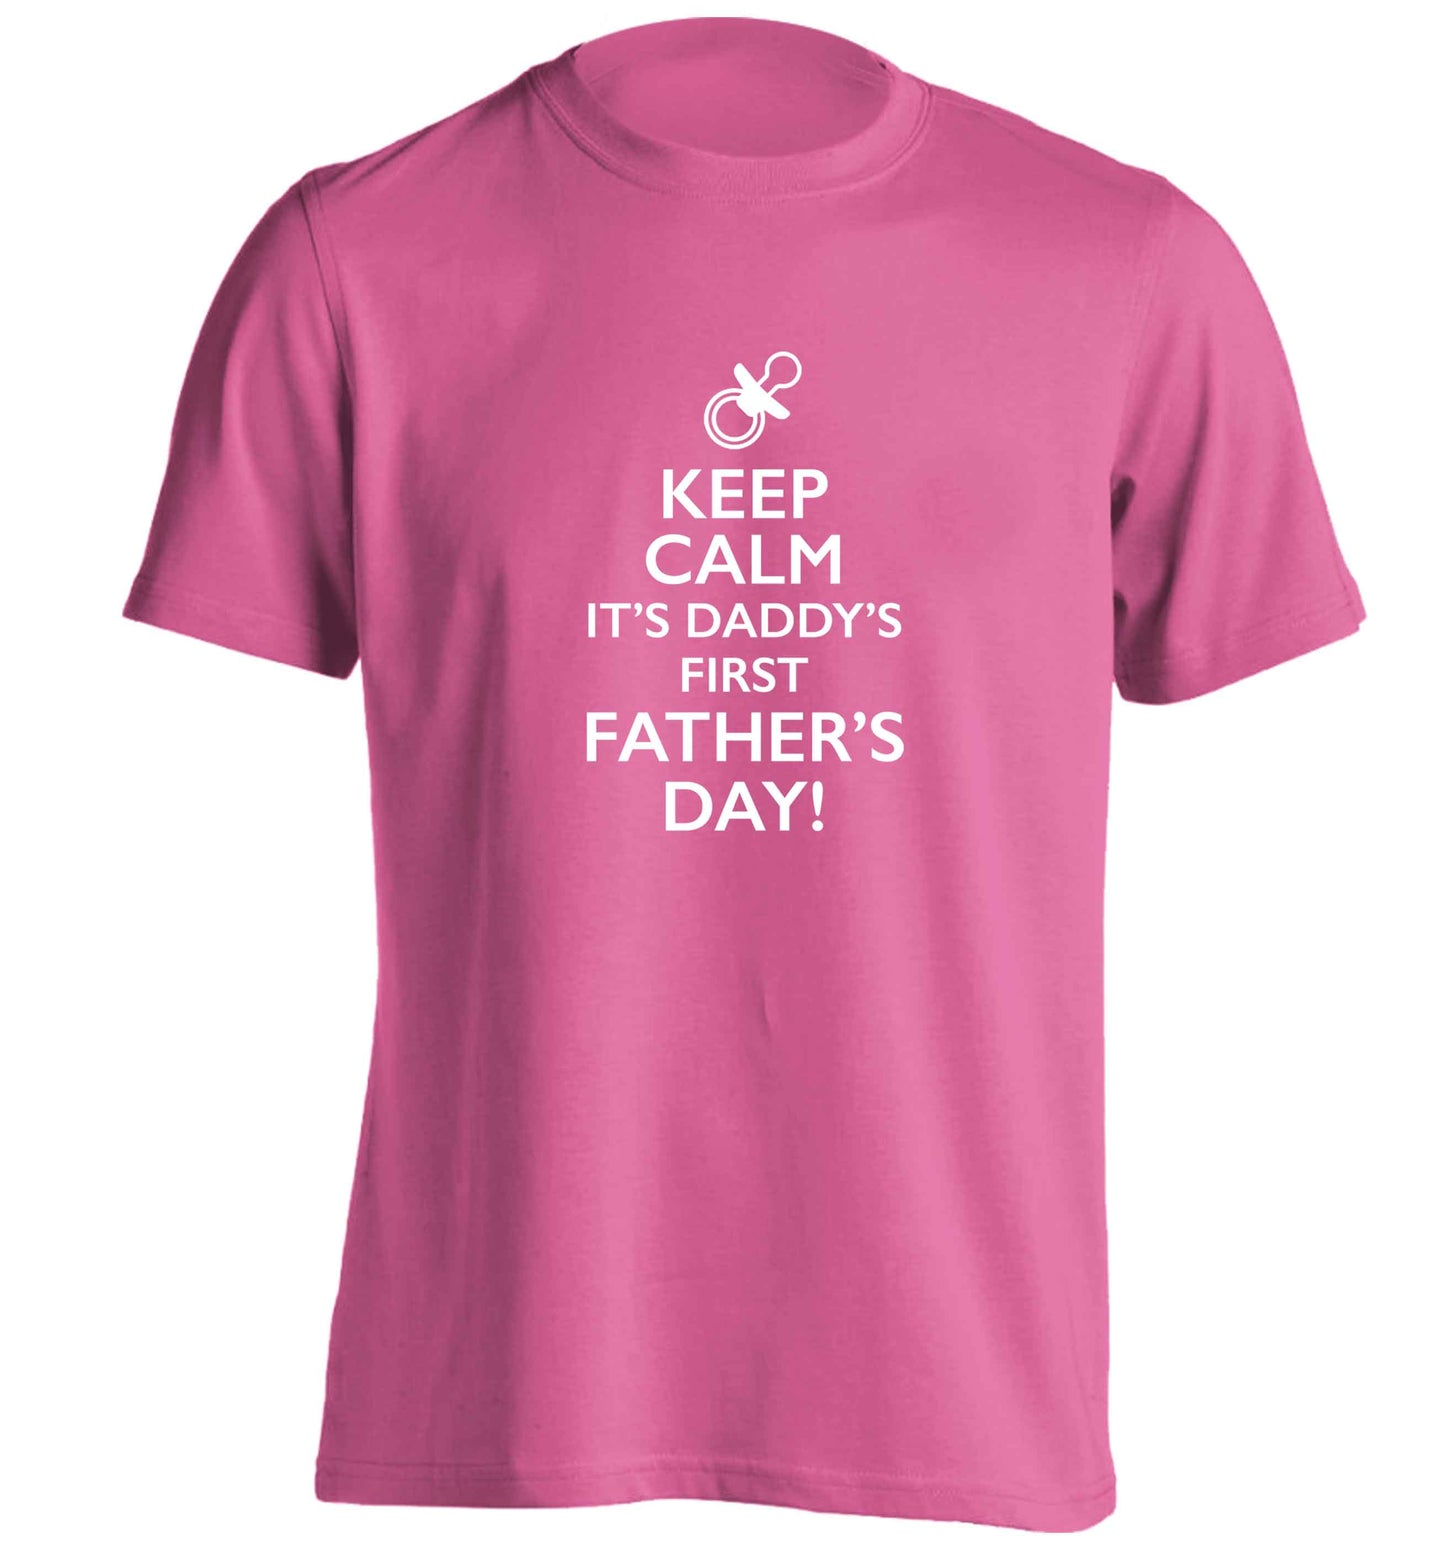 Keep calm it's daddys first father's day adults unisex pink Tshirt 2XL